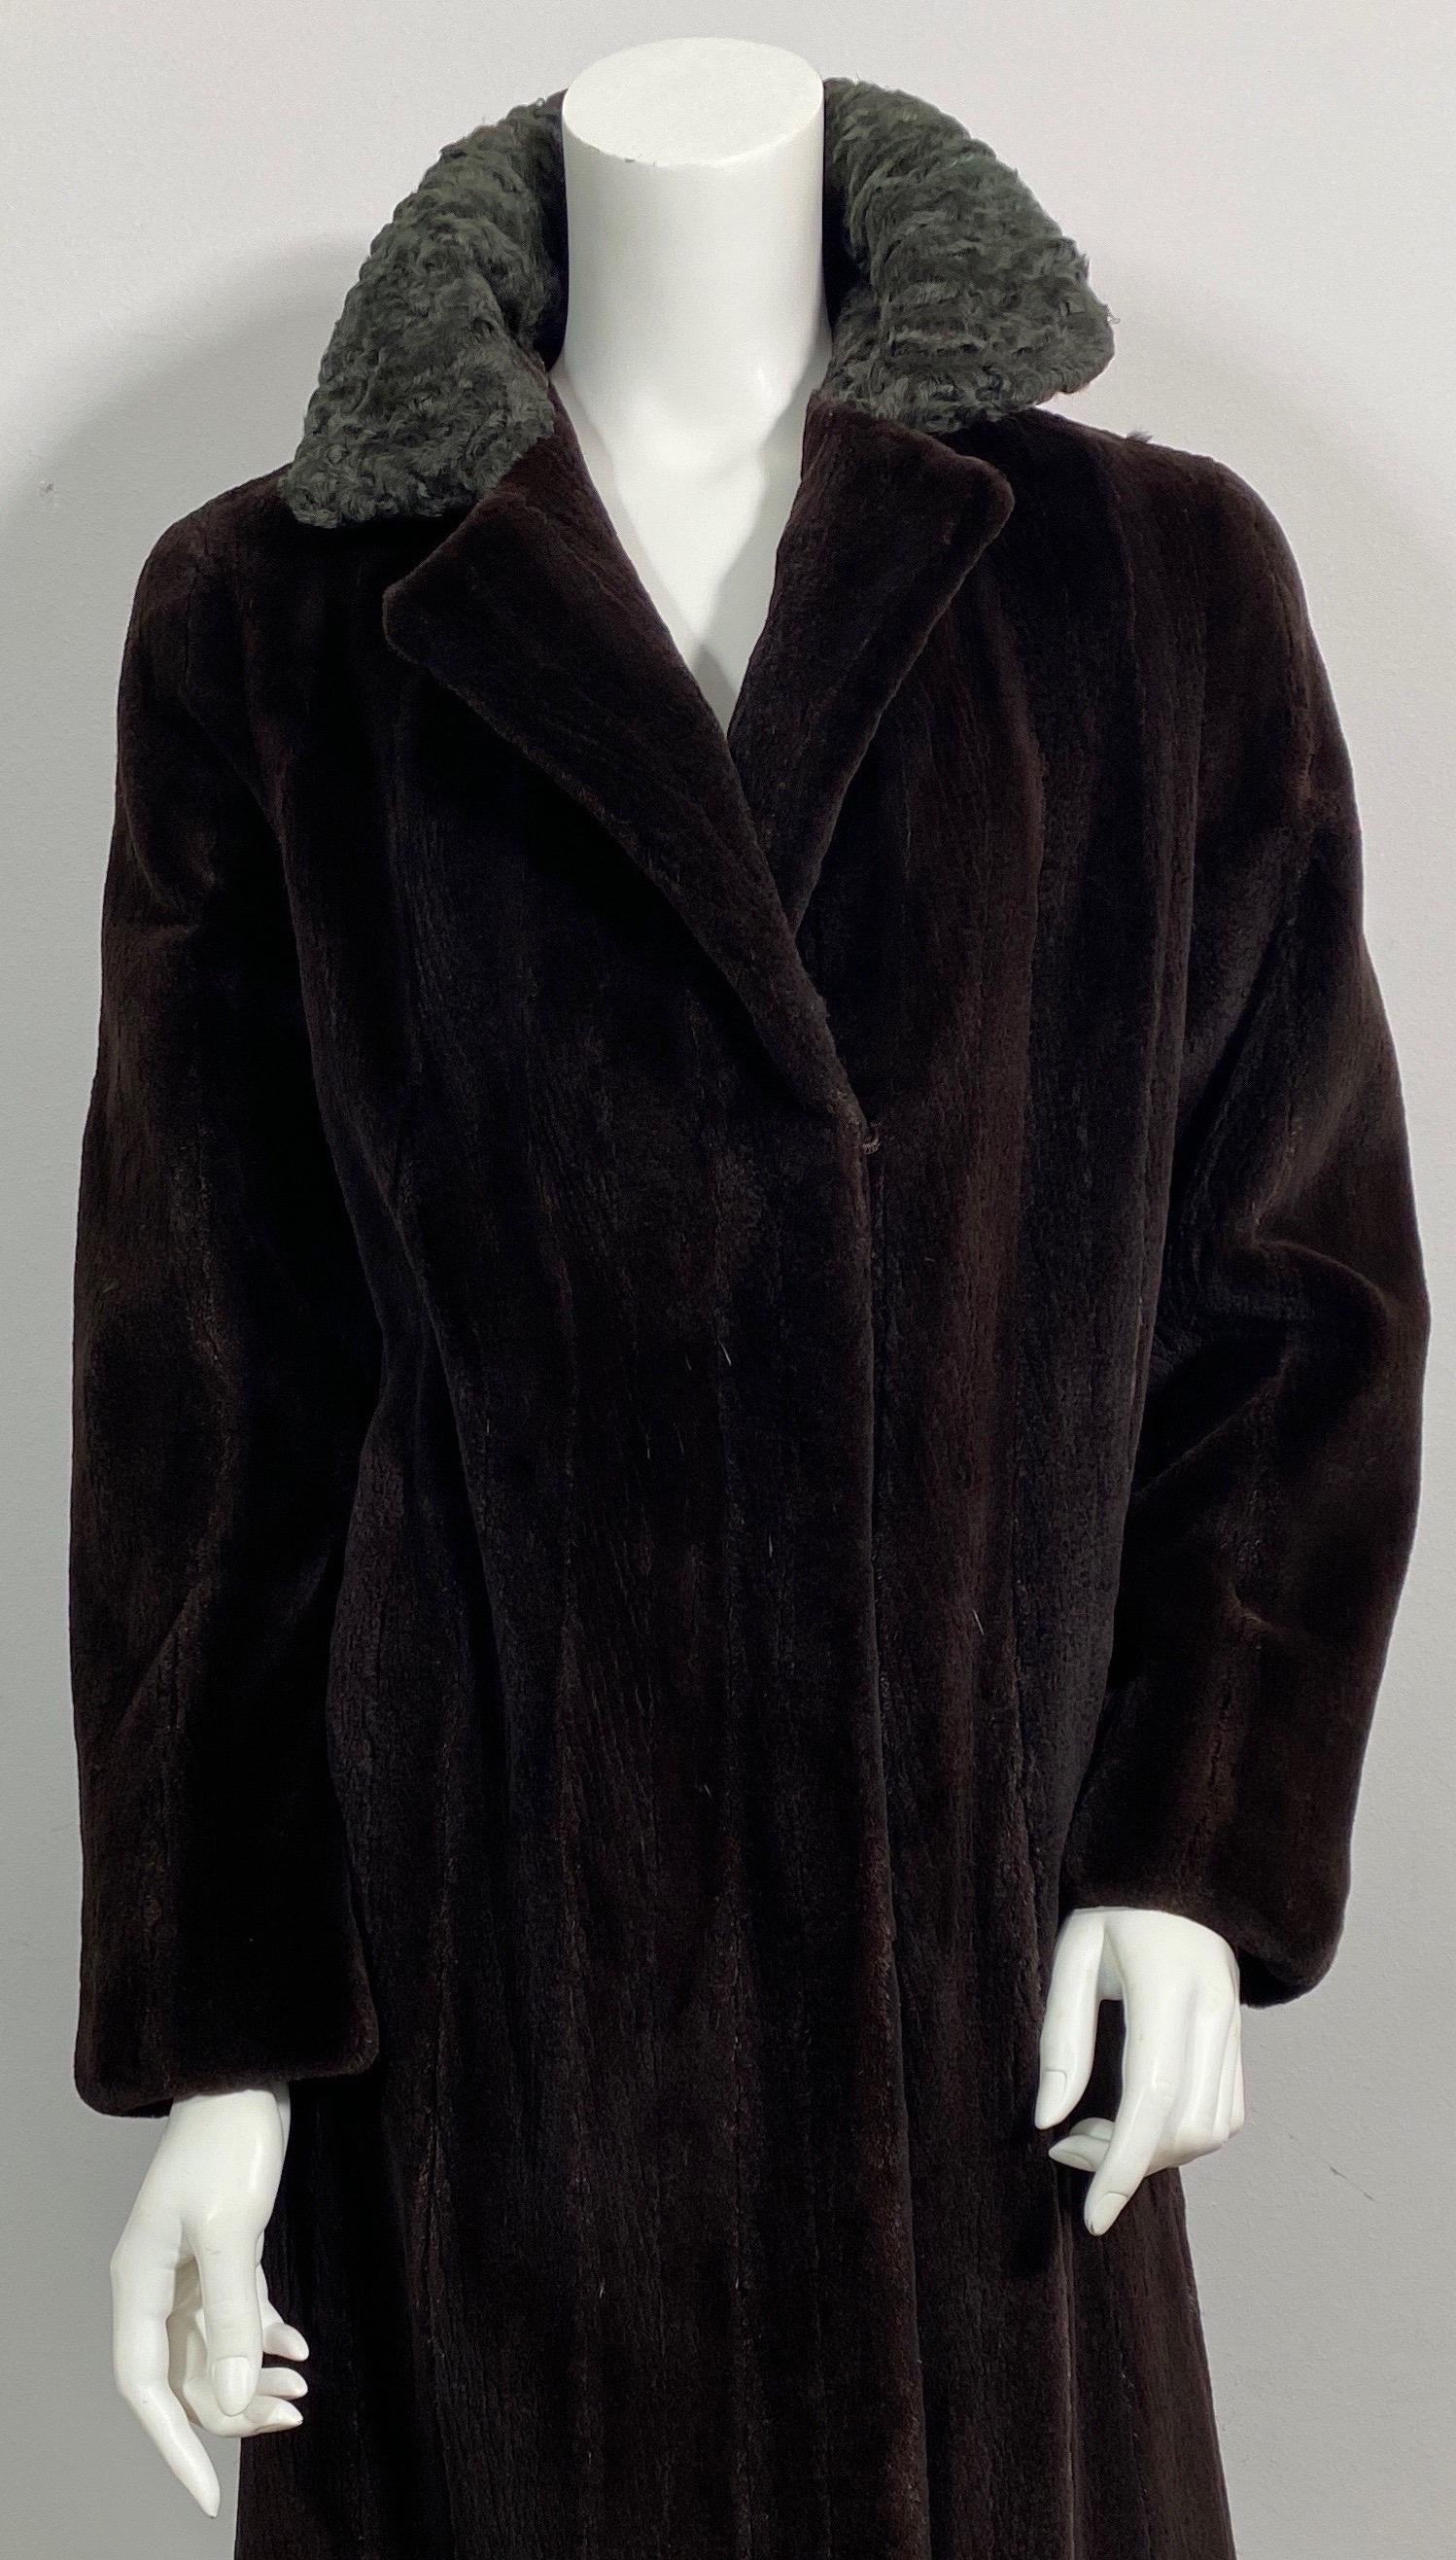 Neiman Marcus Chocolate Brown Sheared Beaver Coat - Size Medium In Excellent Condition For Sale In West Palm Beach, FL